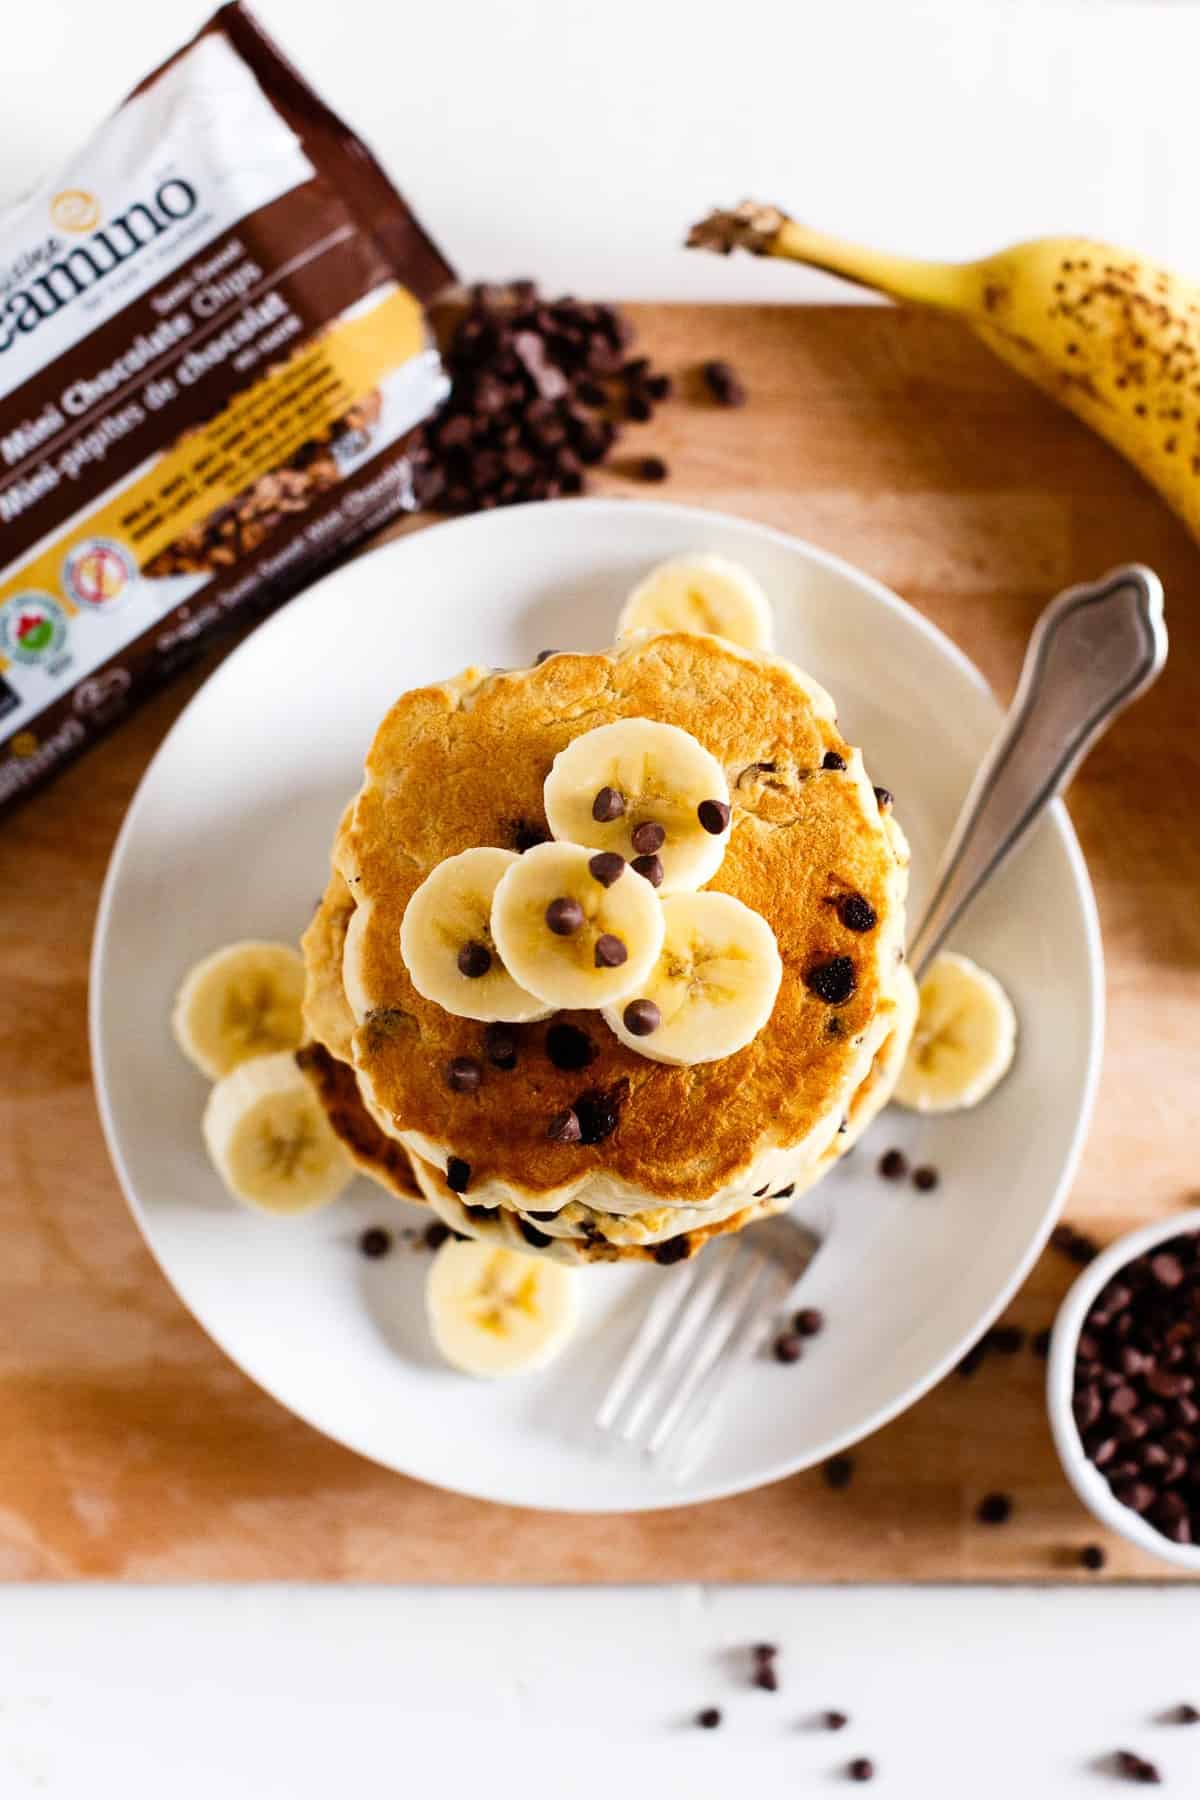 Overhead view of a stack of vegan chocolate chip pancakes topped with sliced banana and chocolate chips.